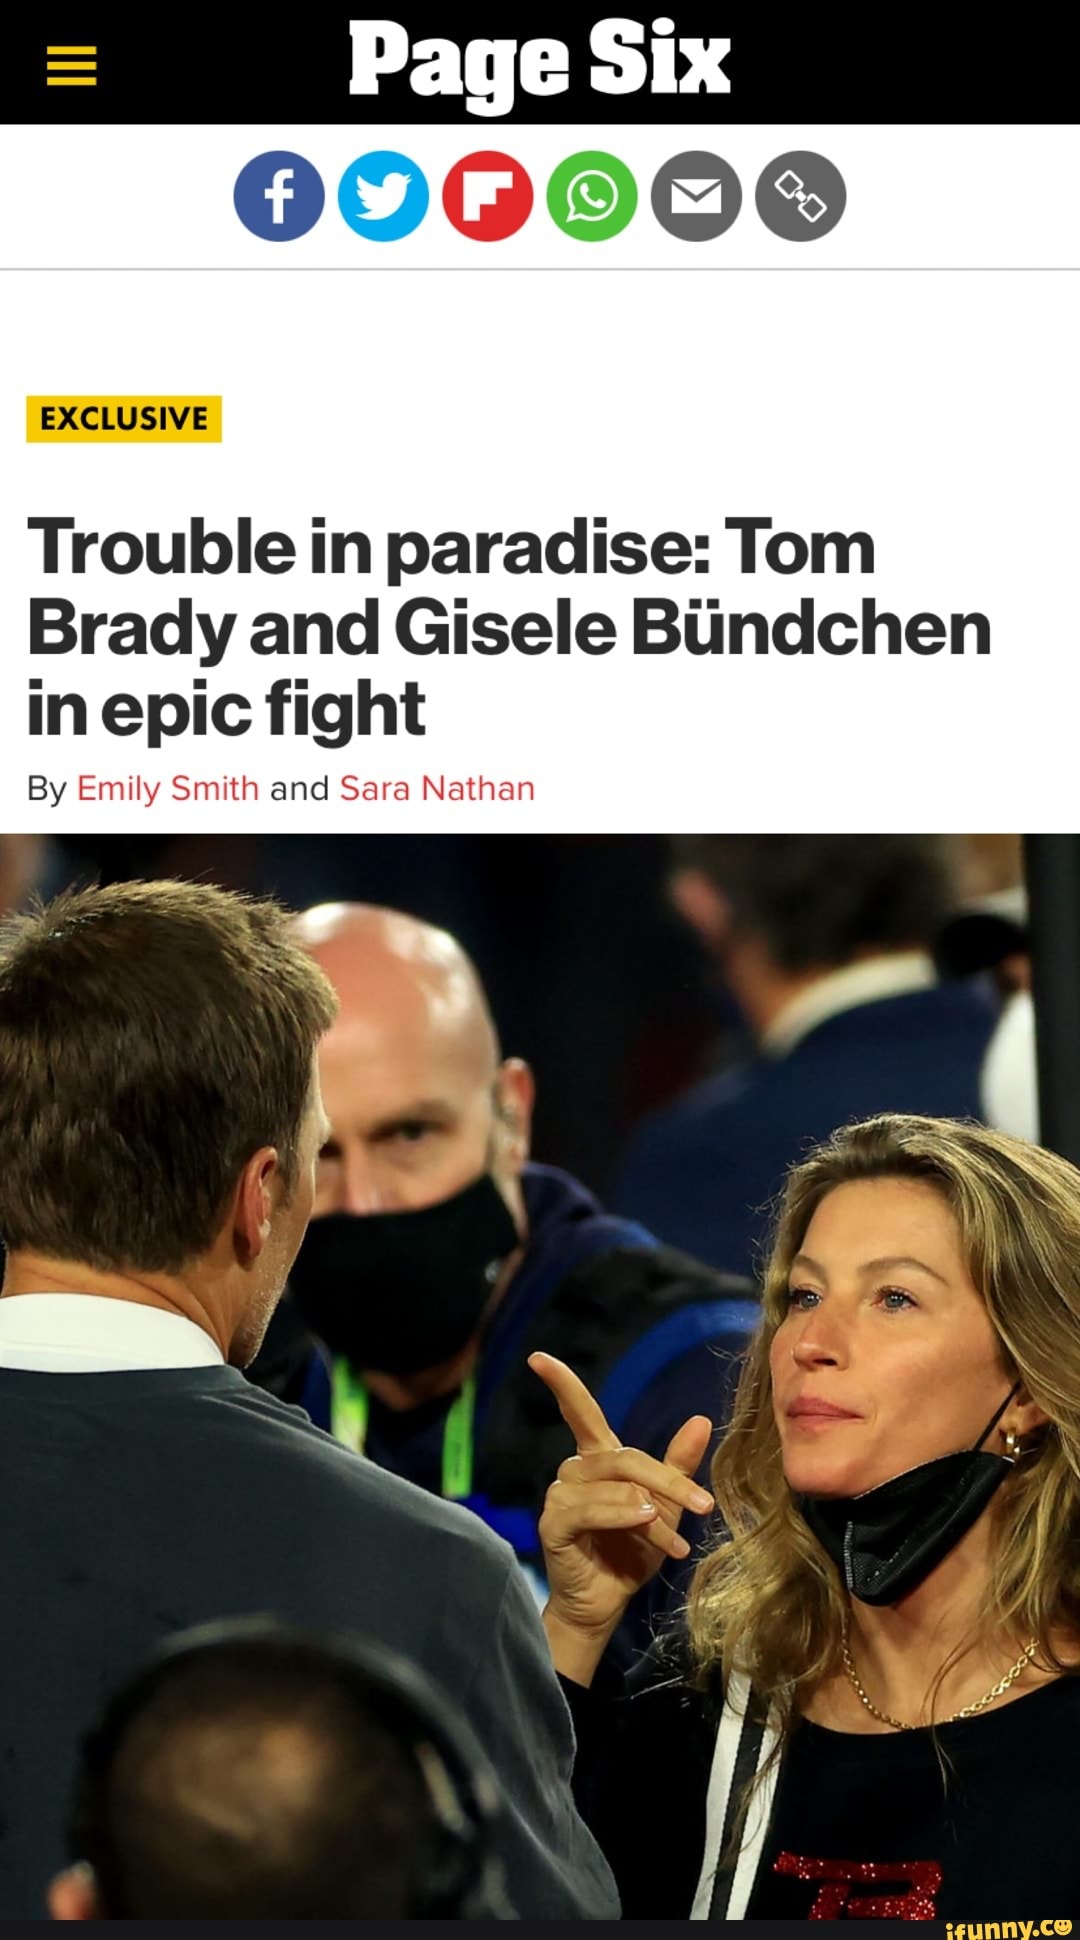 Page Six Trouble In Paradise Tom Brady And Gisele Bundchen In Epic Fight Exclusive By Emily